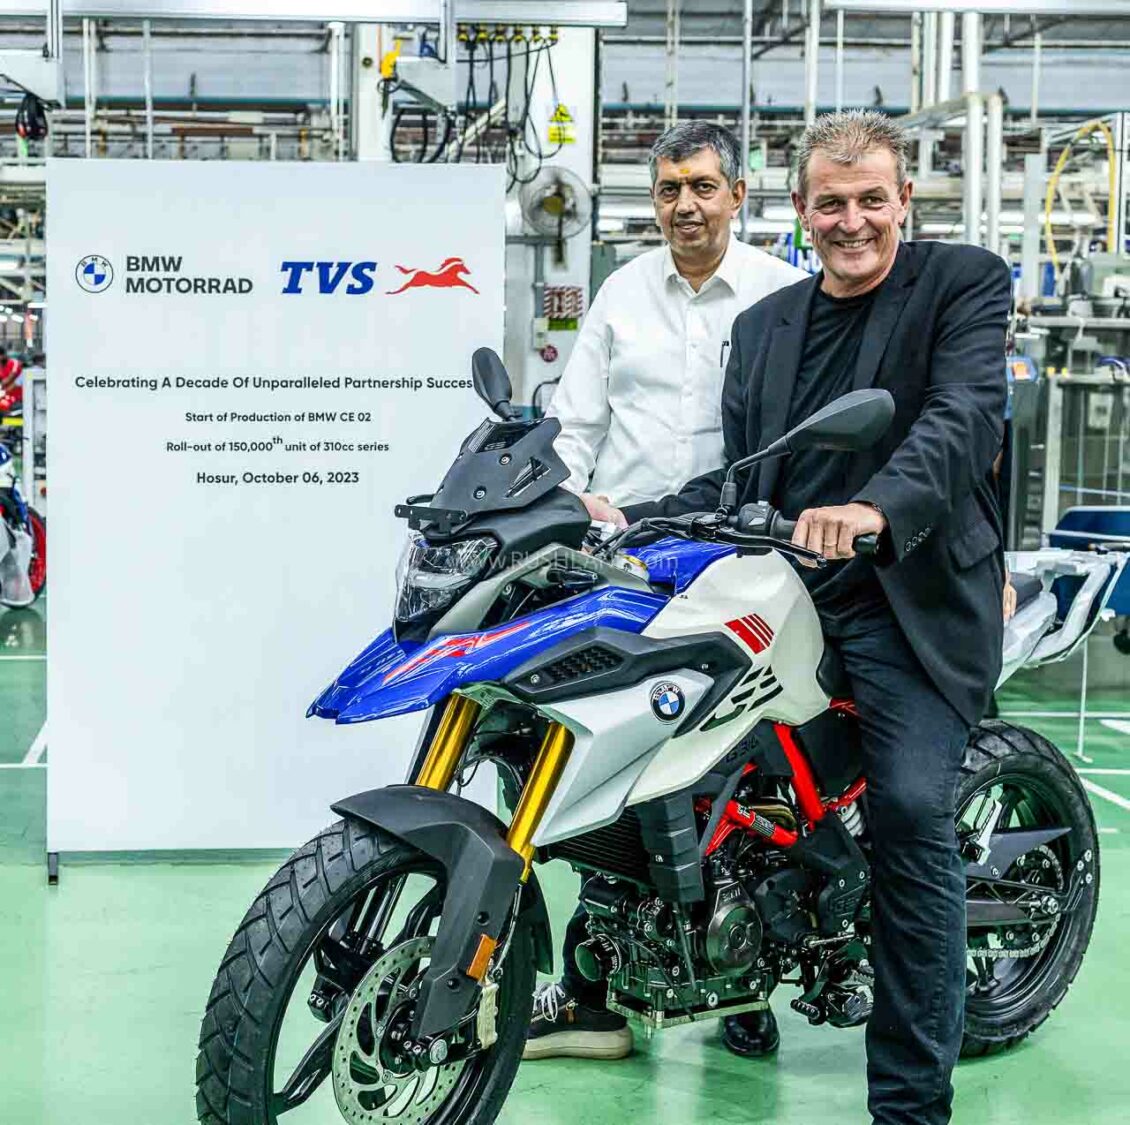 Mr. KN Radhakrishnan, Director & CEO, TVS Motor Company and Dr. Markus Shramm, Head of BMW Motorrad at the 150,000th unit roll-out of the 310 series